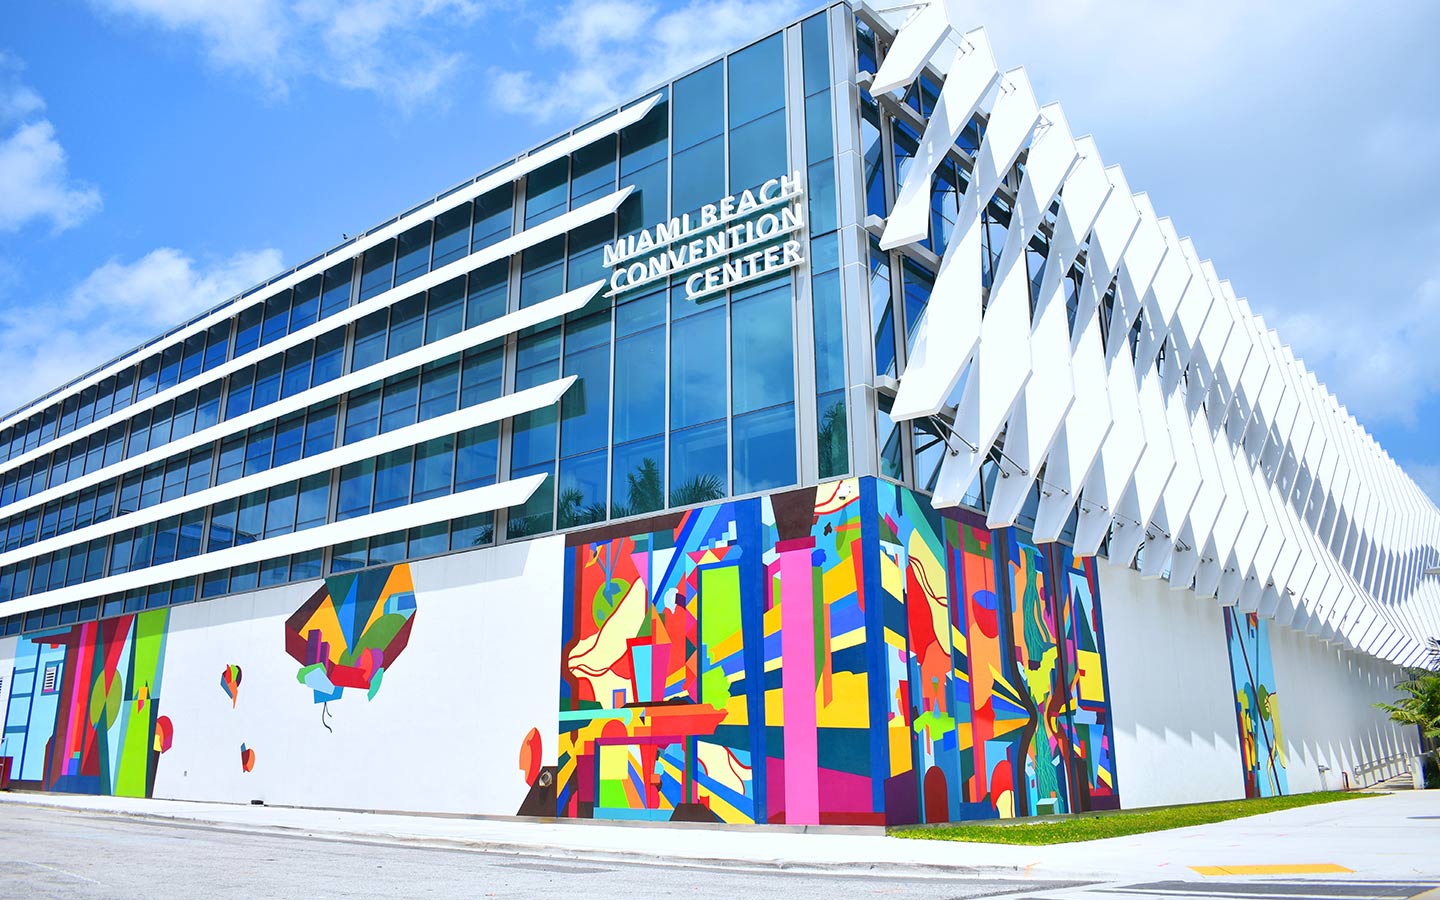 Miami Beach Convention Center with colorful mural